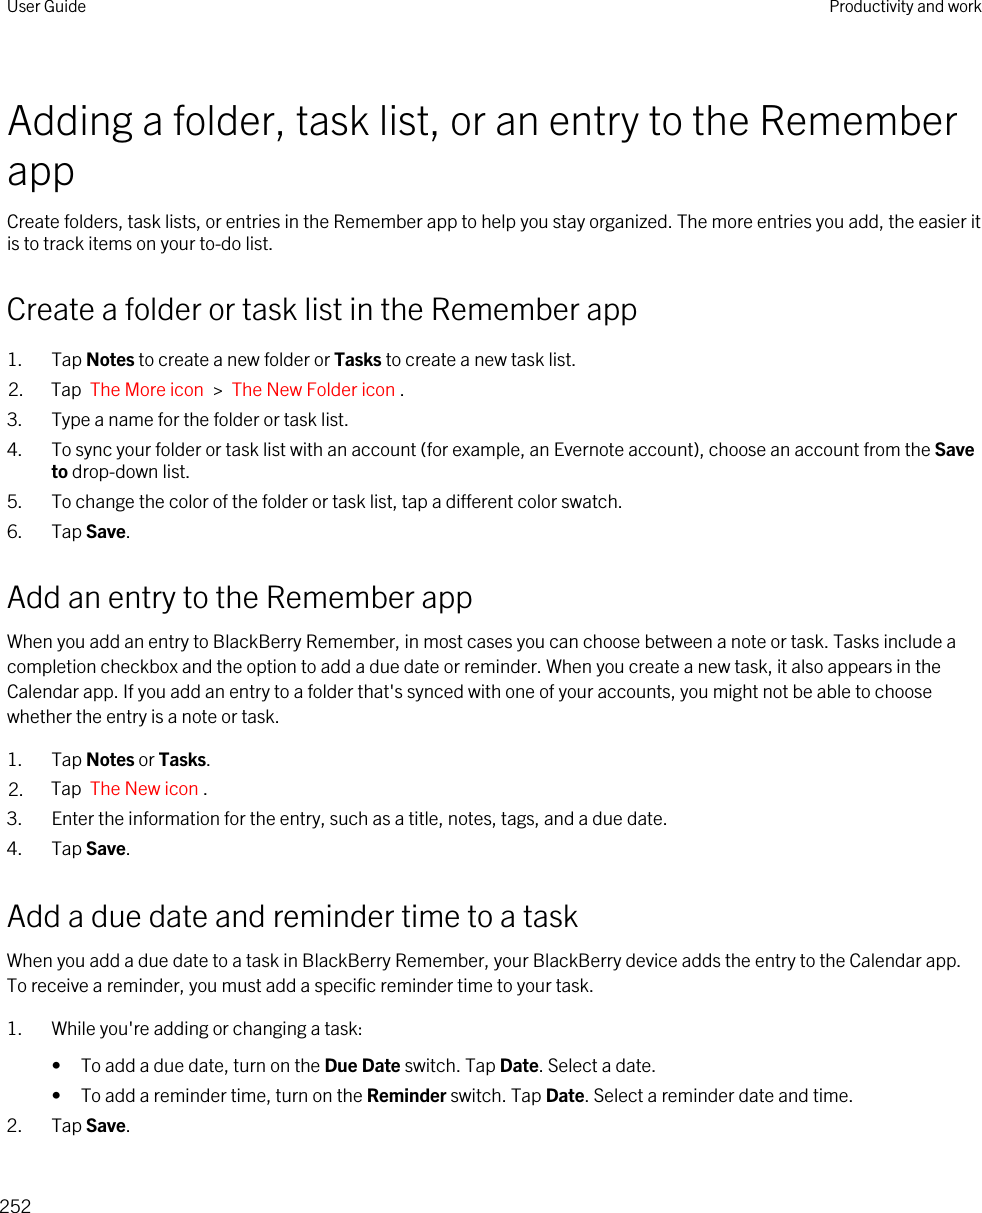 Adding a folder, task list, or an entry to the Remember appCreate folders, task lists, or entries in the Remember app to help you stay organized. The more entries you add, the easier it is to track items on your to-do list.Create a folder or task list in the Remember app1. Tap Notes to create a new folder or Tasks to create a new task list.2. Tap  The More icon  &gt;  The New Folder icon .3. Type a name for the folder or task list.4. To sync your folder or task list with an account (for example, an Evernote account), choose an account from the Save to drop-down list.5. To change the color of the folder or task list, tap a different color swatch.6. Tap Save.Add an entry to the Remember appWhen you add an entry to BlackBerry Remember, in most cases you can choose between a note or task. Tasks include a completion checkbox and the option to add a due date or reminder. When you create a new task, it also appears in the Calendar app. If you add an entry to a folder that&apos;s synced with one of your accounts, you might not be able to choose whether the entry is a note or task.1. Tap Notes or Tasks.2. Tap  The New icon .3. Enter the information for the entry, such as a title, notes, tags, and a due date.4. Tap Save.Add a due date and reminder time to a taskWhen you add a due date to a task in BlackBerry Remember, your BlackBerry device adds the entry to the Calendar app. To receive a reminder, you must add a specific reminder time to your task.1. While you&apos;re adding or changing a task:• To add a due date, turn on the Due Date switch. Tap Date. Select a date.• To add a reminder time, turn on the Reminder switch. Tap Date. Select a reminder date and time.2. Tap Save.User Guide Productivity and work252